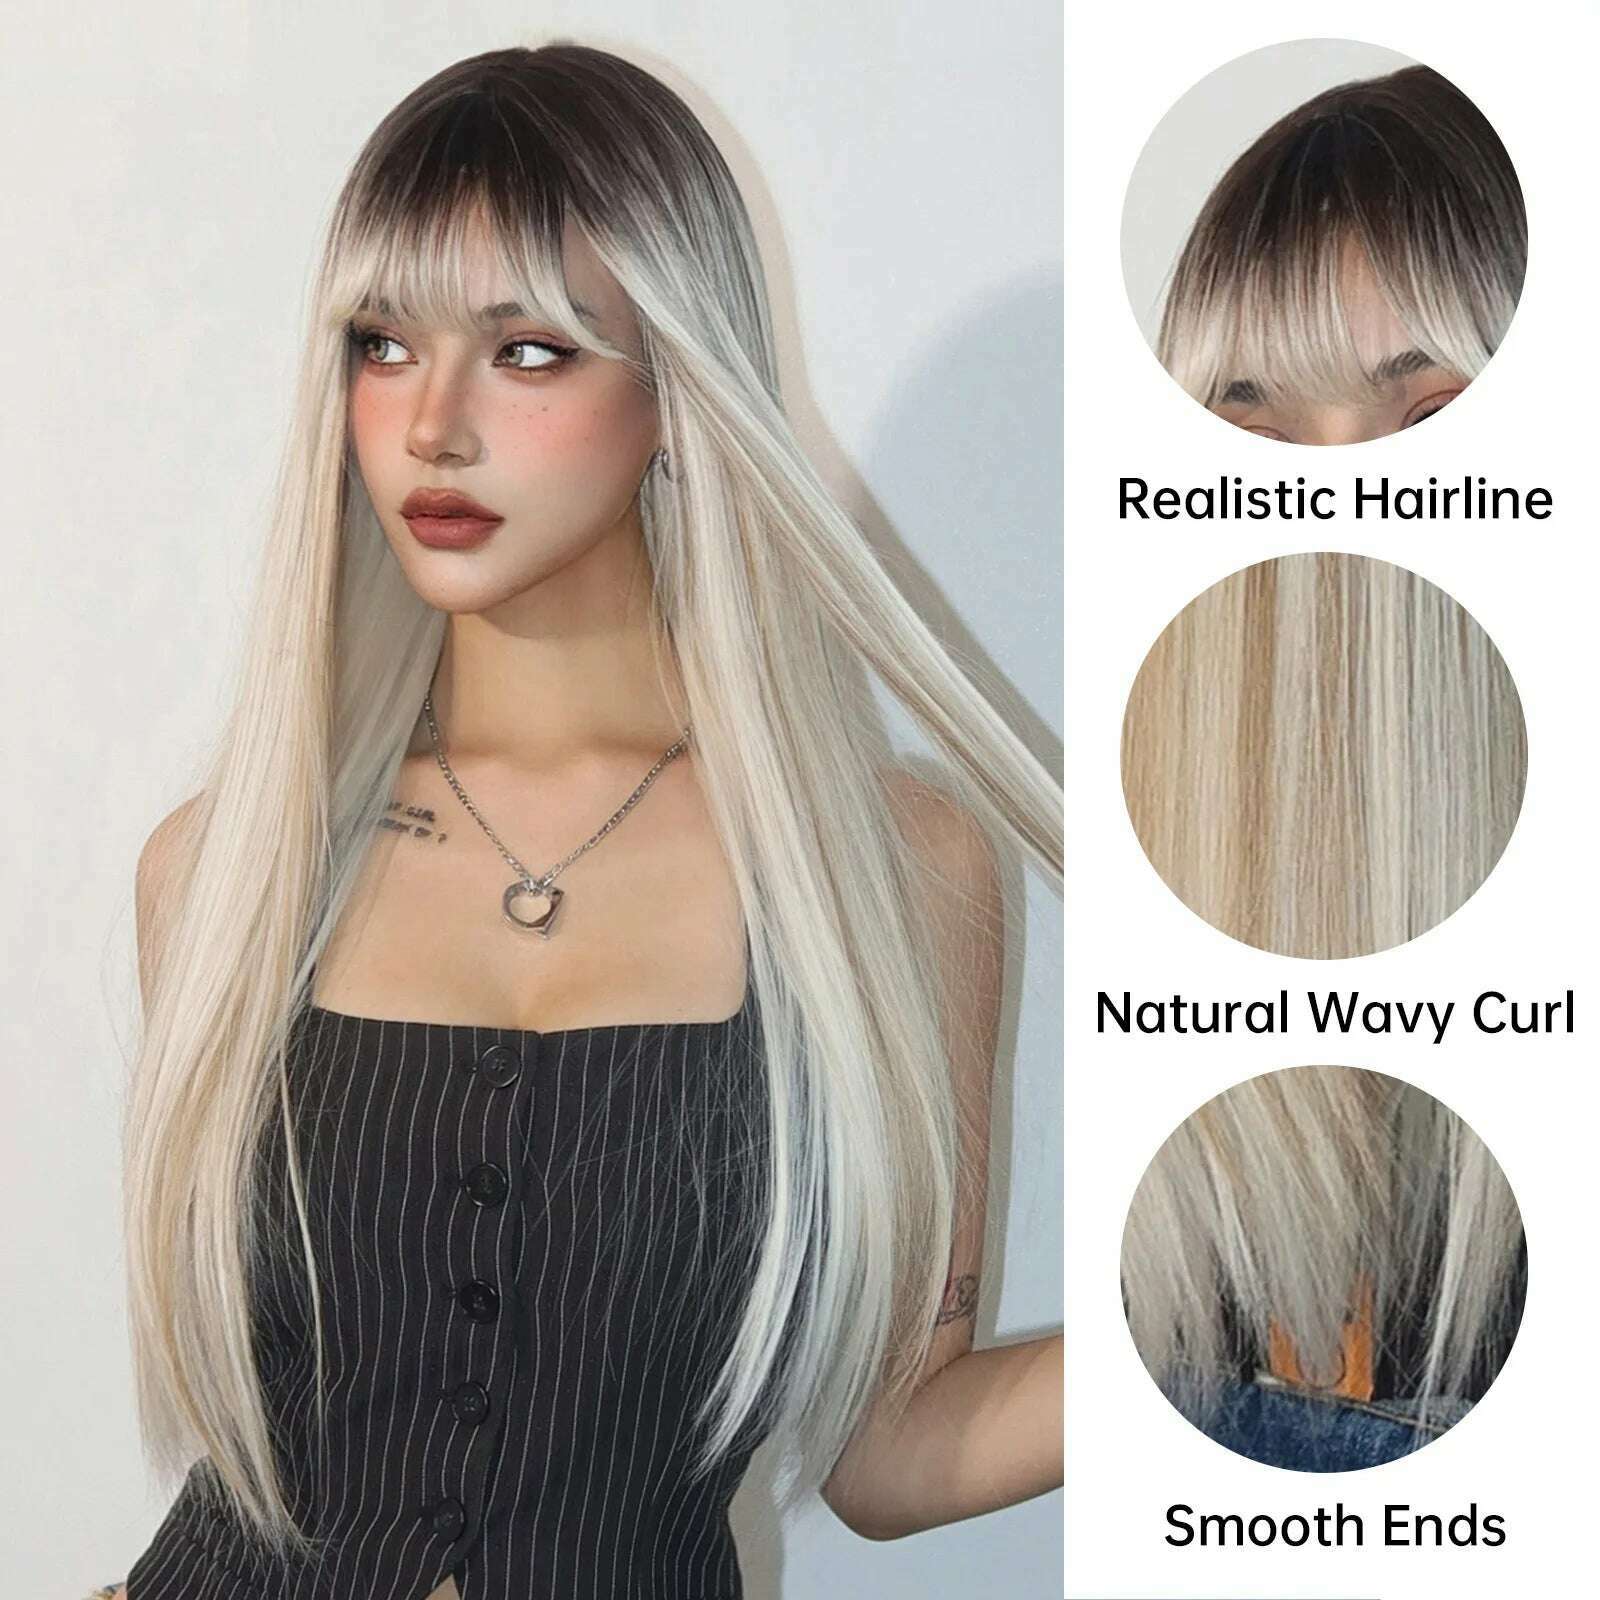 KIMLUD, HENRY MARGU Blonde Platinum Ombre Wig Long Straight Cosplay Wig with Bangs Women Christmas Synthetic Wig High Temperature Fiber, KIMLUD Womens Clothes